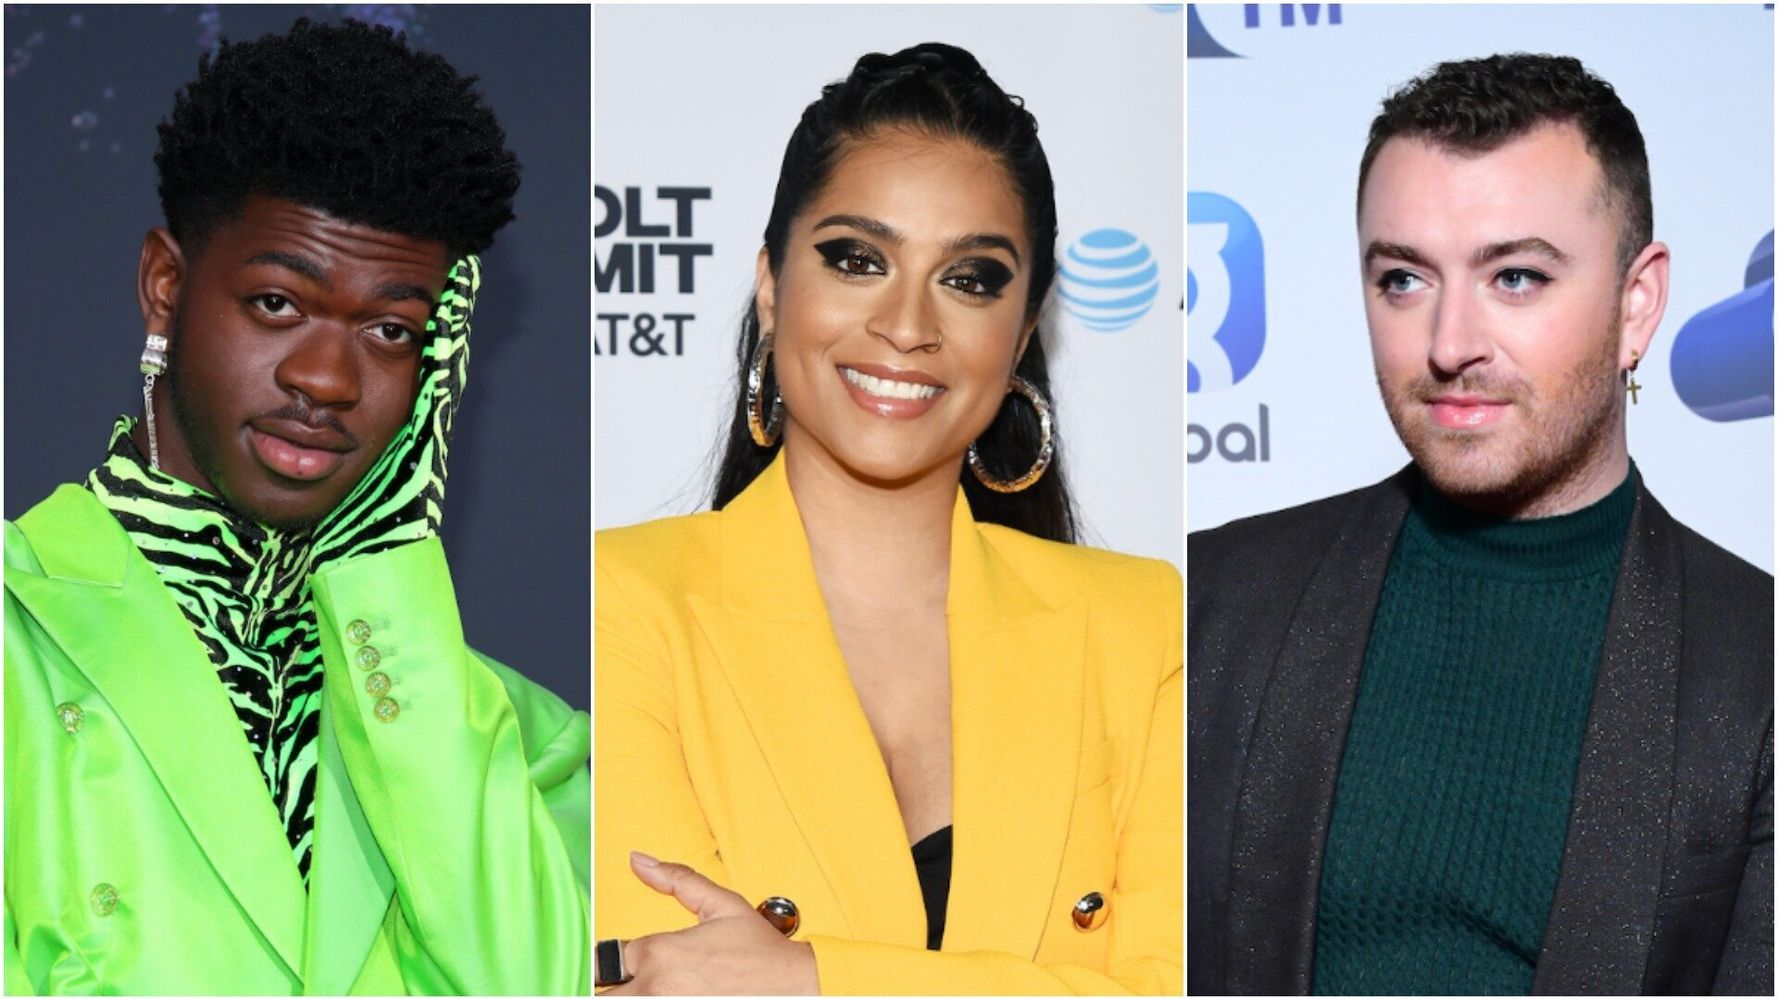 Here Are 20 Lgbtq Celebrity Coming Out Stories That Moved Us In 2019